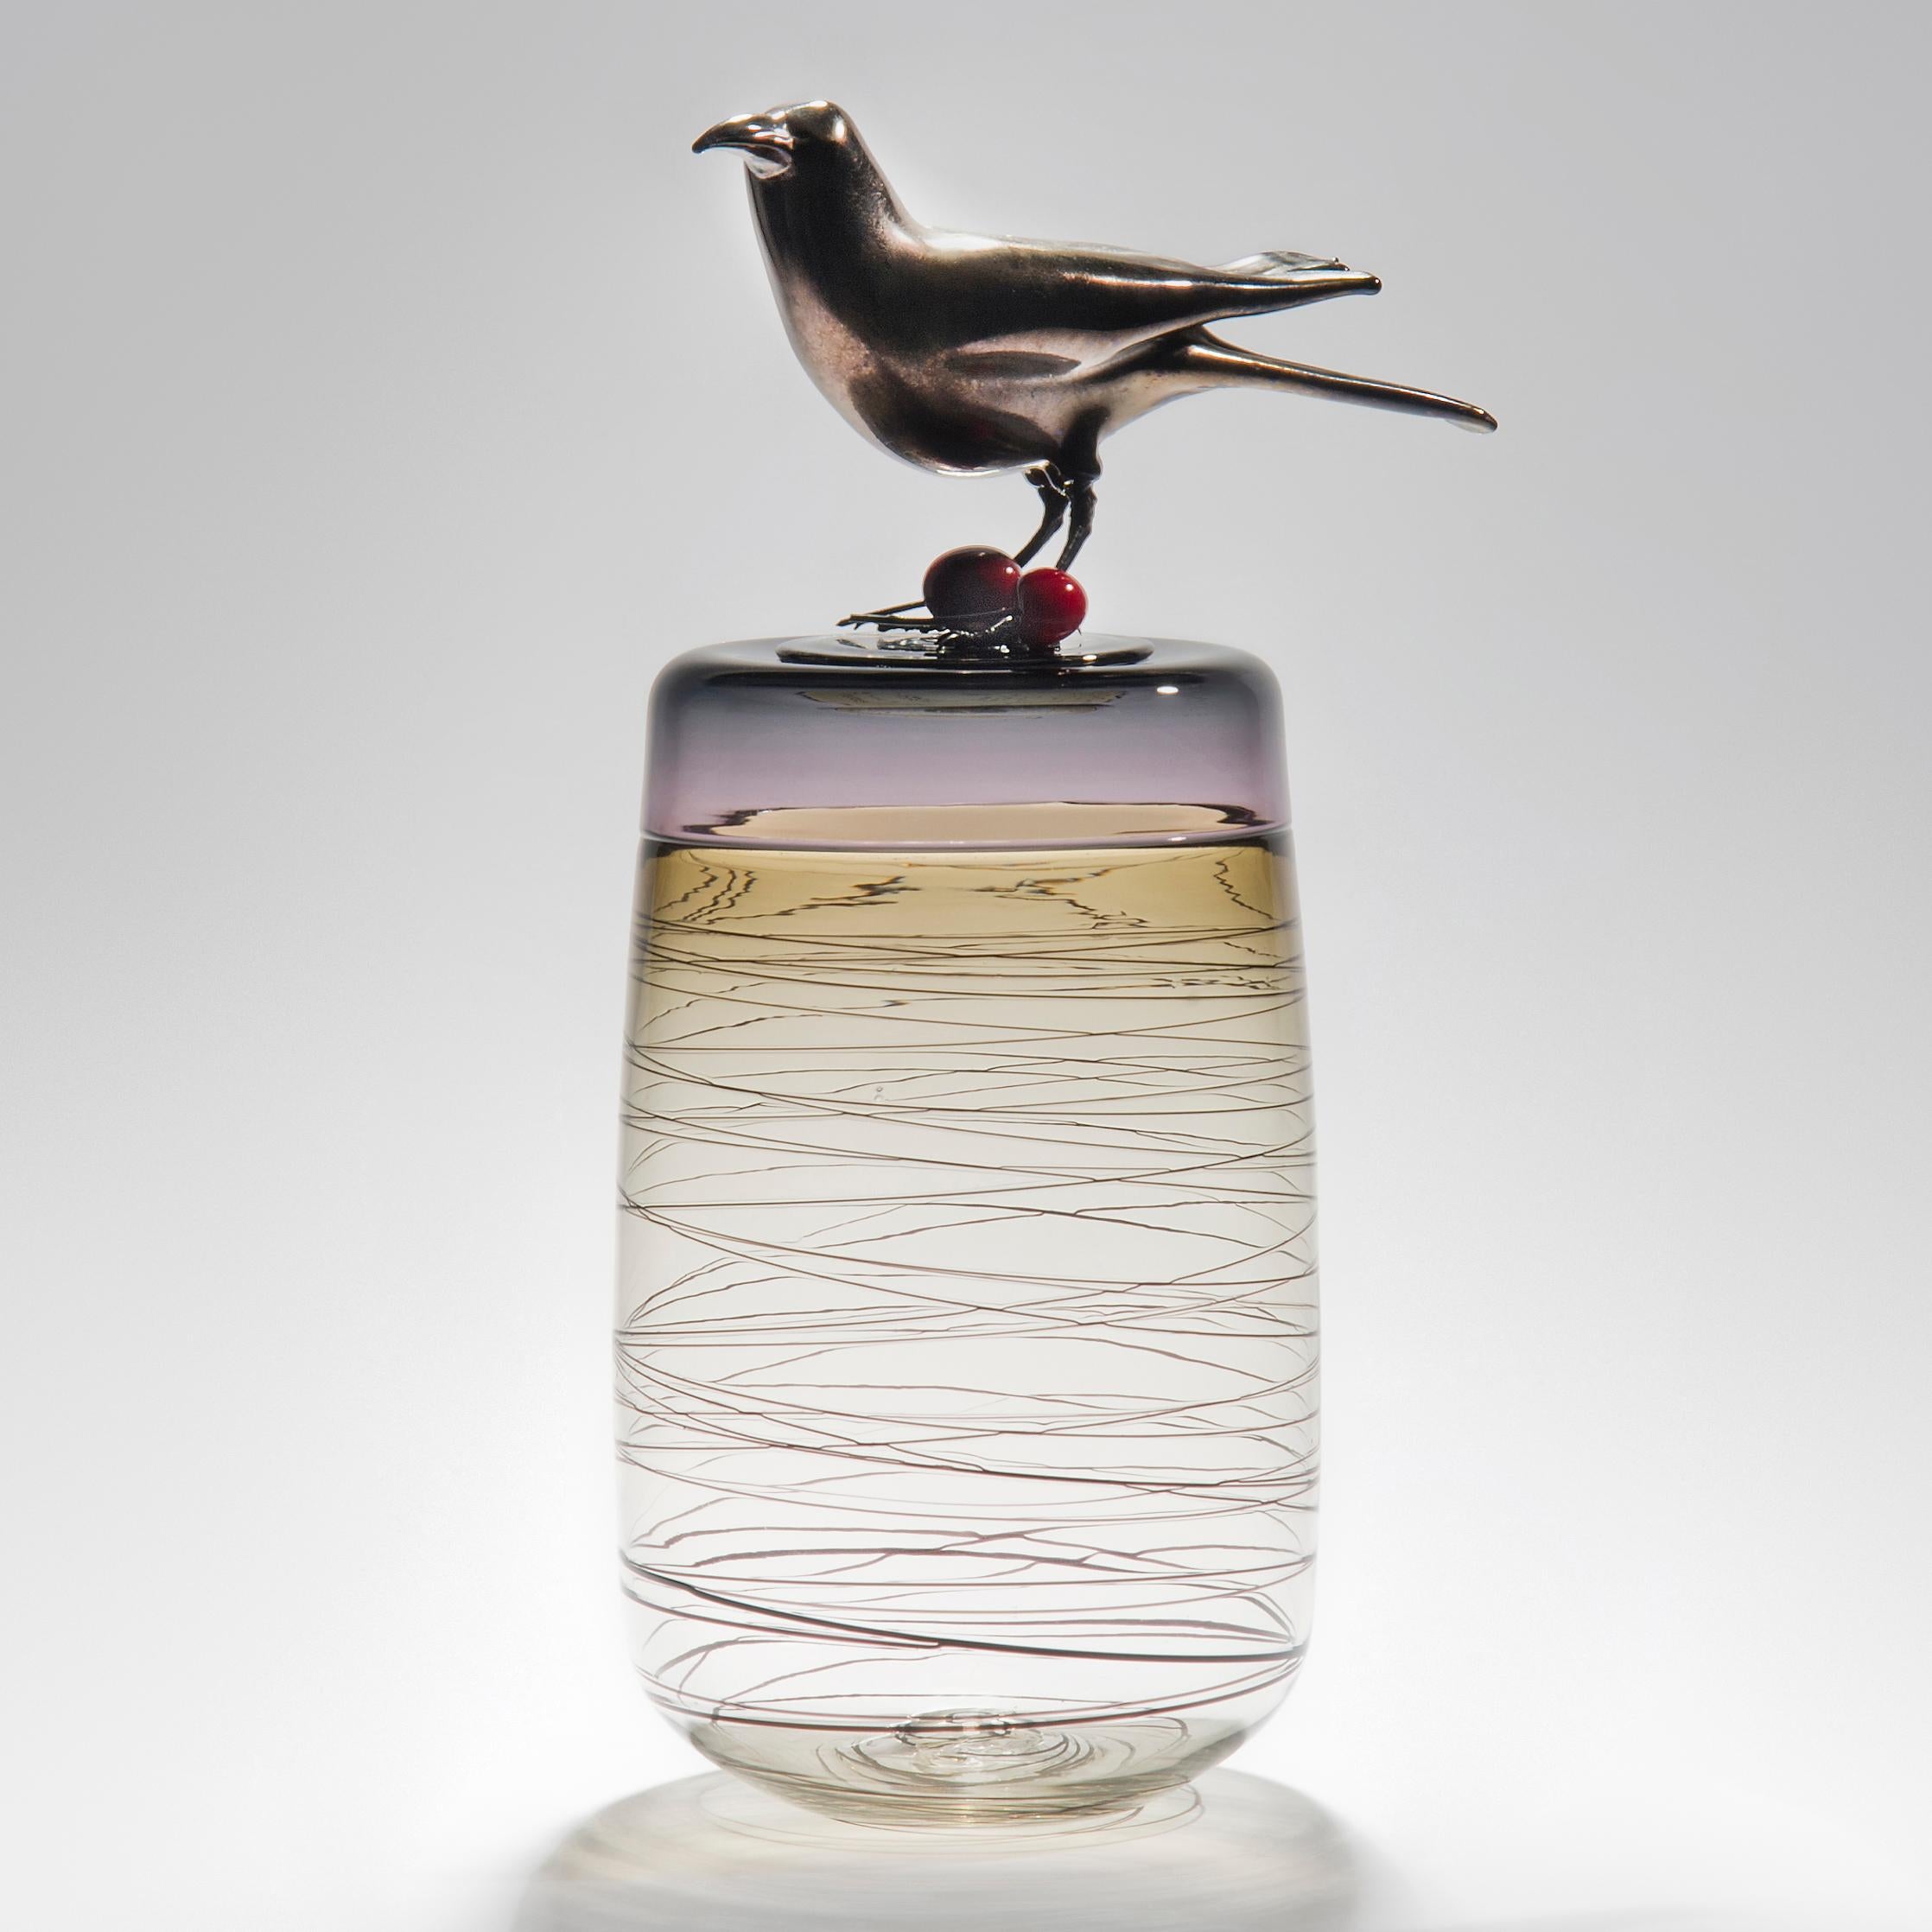 Red Cherries, is a hand blown art glass vase in olive with removal lid adorned with a hot sculpted black glass crow with red cherries by the British artist Julie Johnson. The crow figurine can also be lifted off with the main body leaving a